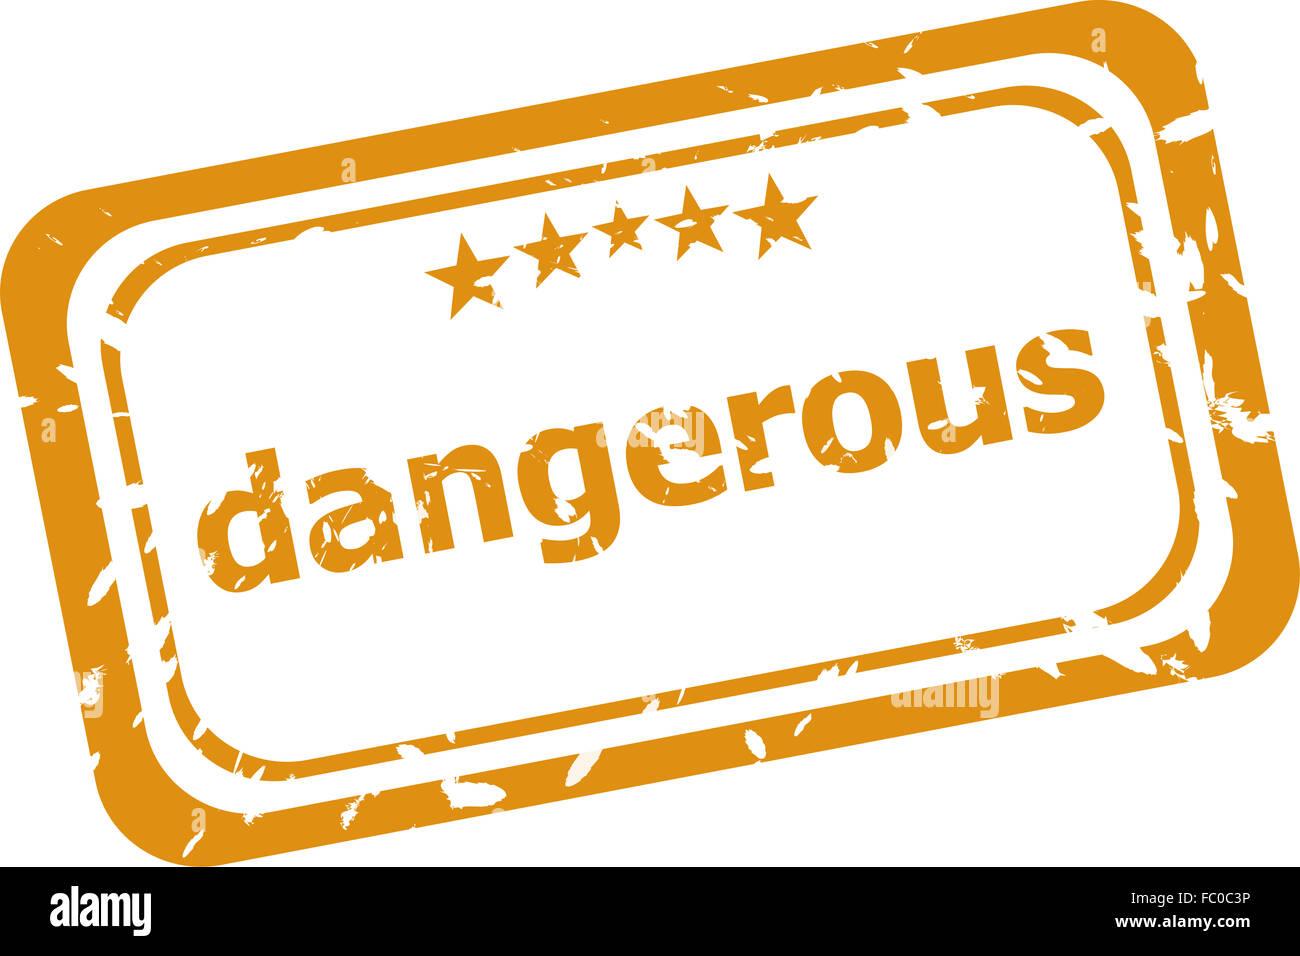 dangerous word on rubber old business stamp Stock Photo